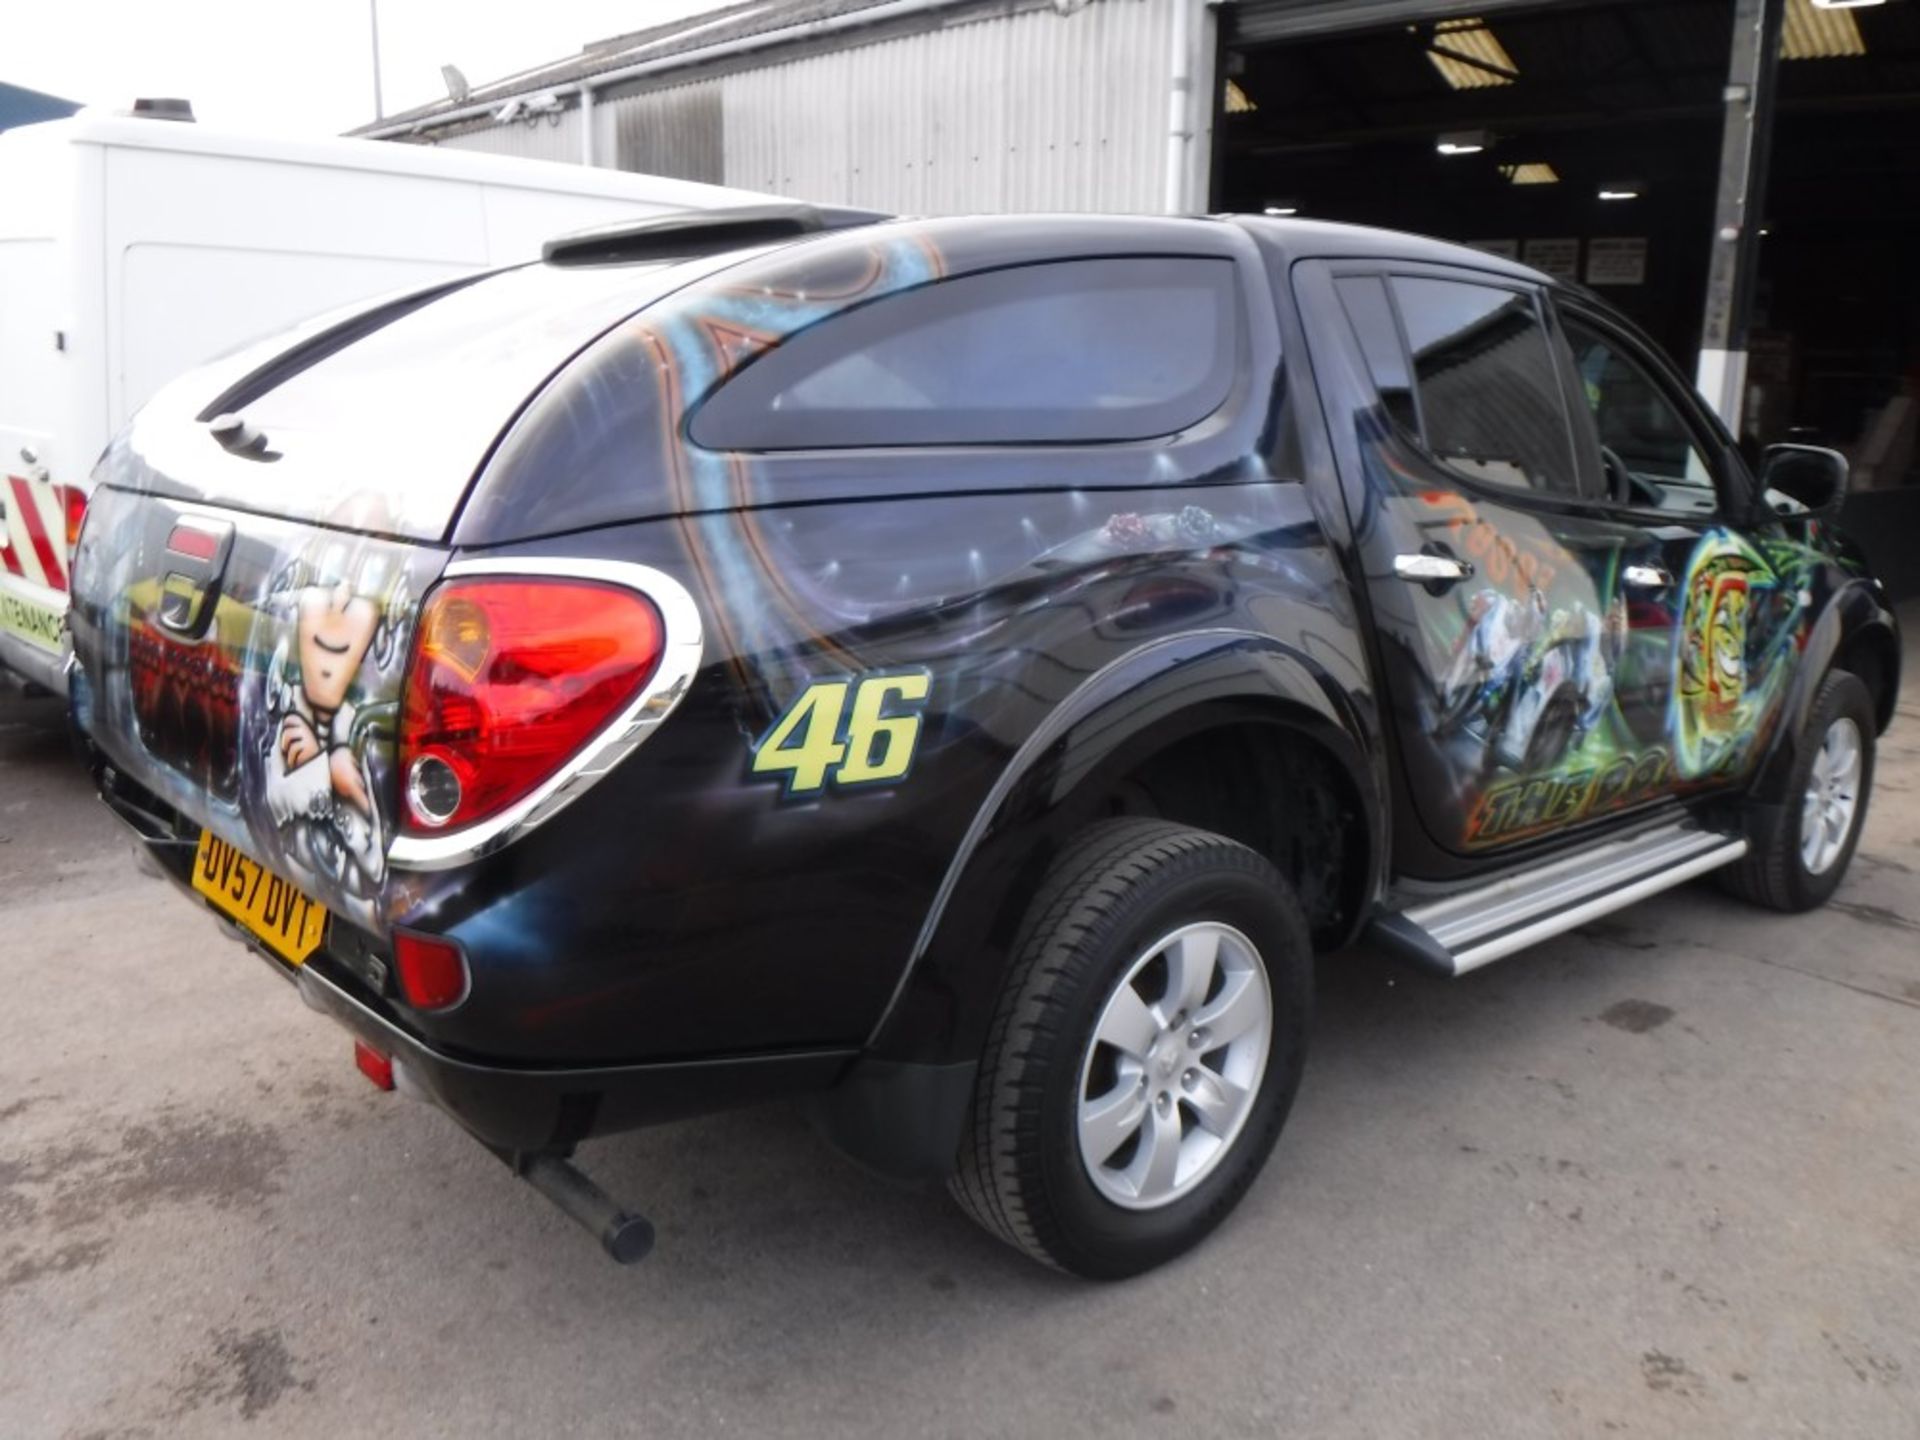 57 reg MITSUBISHI L200 ANIMAL DI-D D/C PICKUP WITH CUSTOMISED VALENTINO ROSSI AIR BRUSHED PAINTWORK, - Image 5 of 6